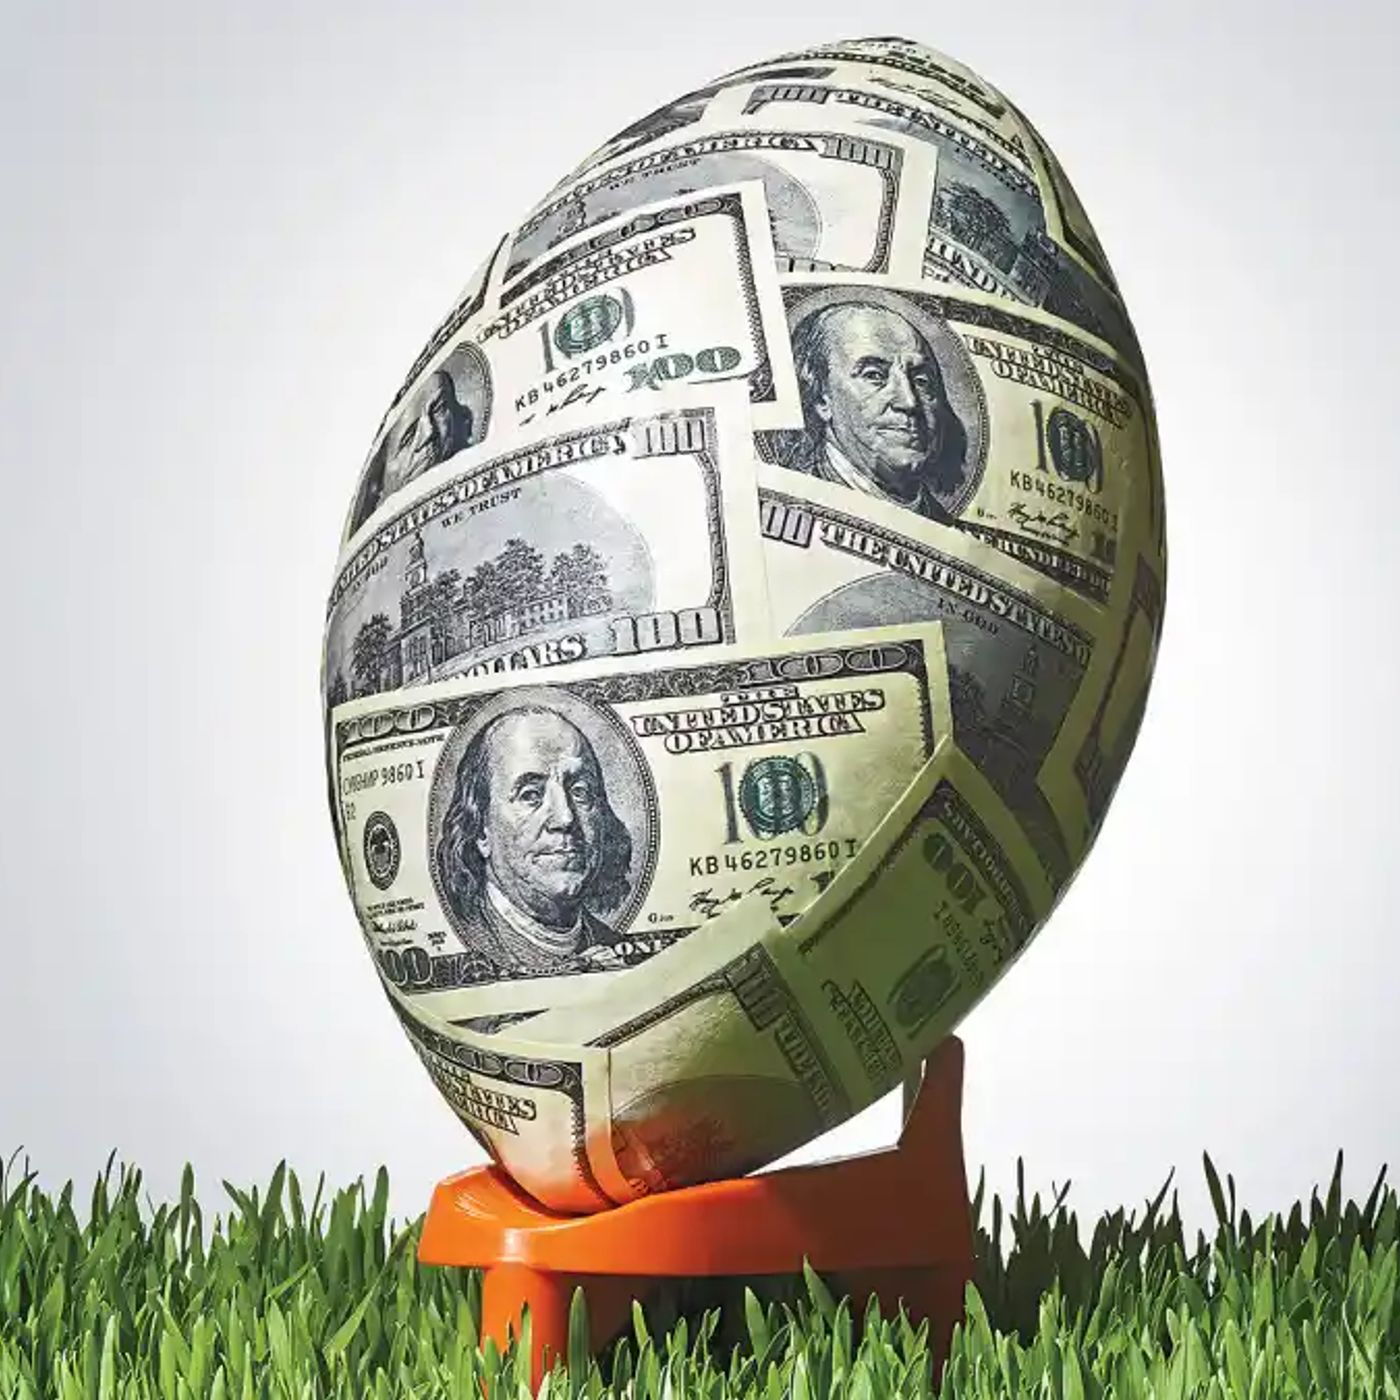 The Popularity & $ Hold of Fantasy Football & Football Gambling on Americans